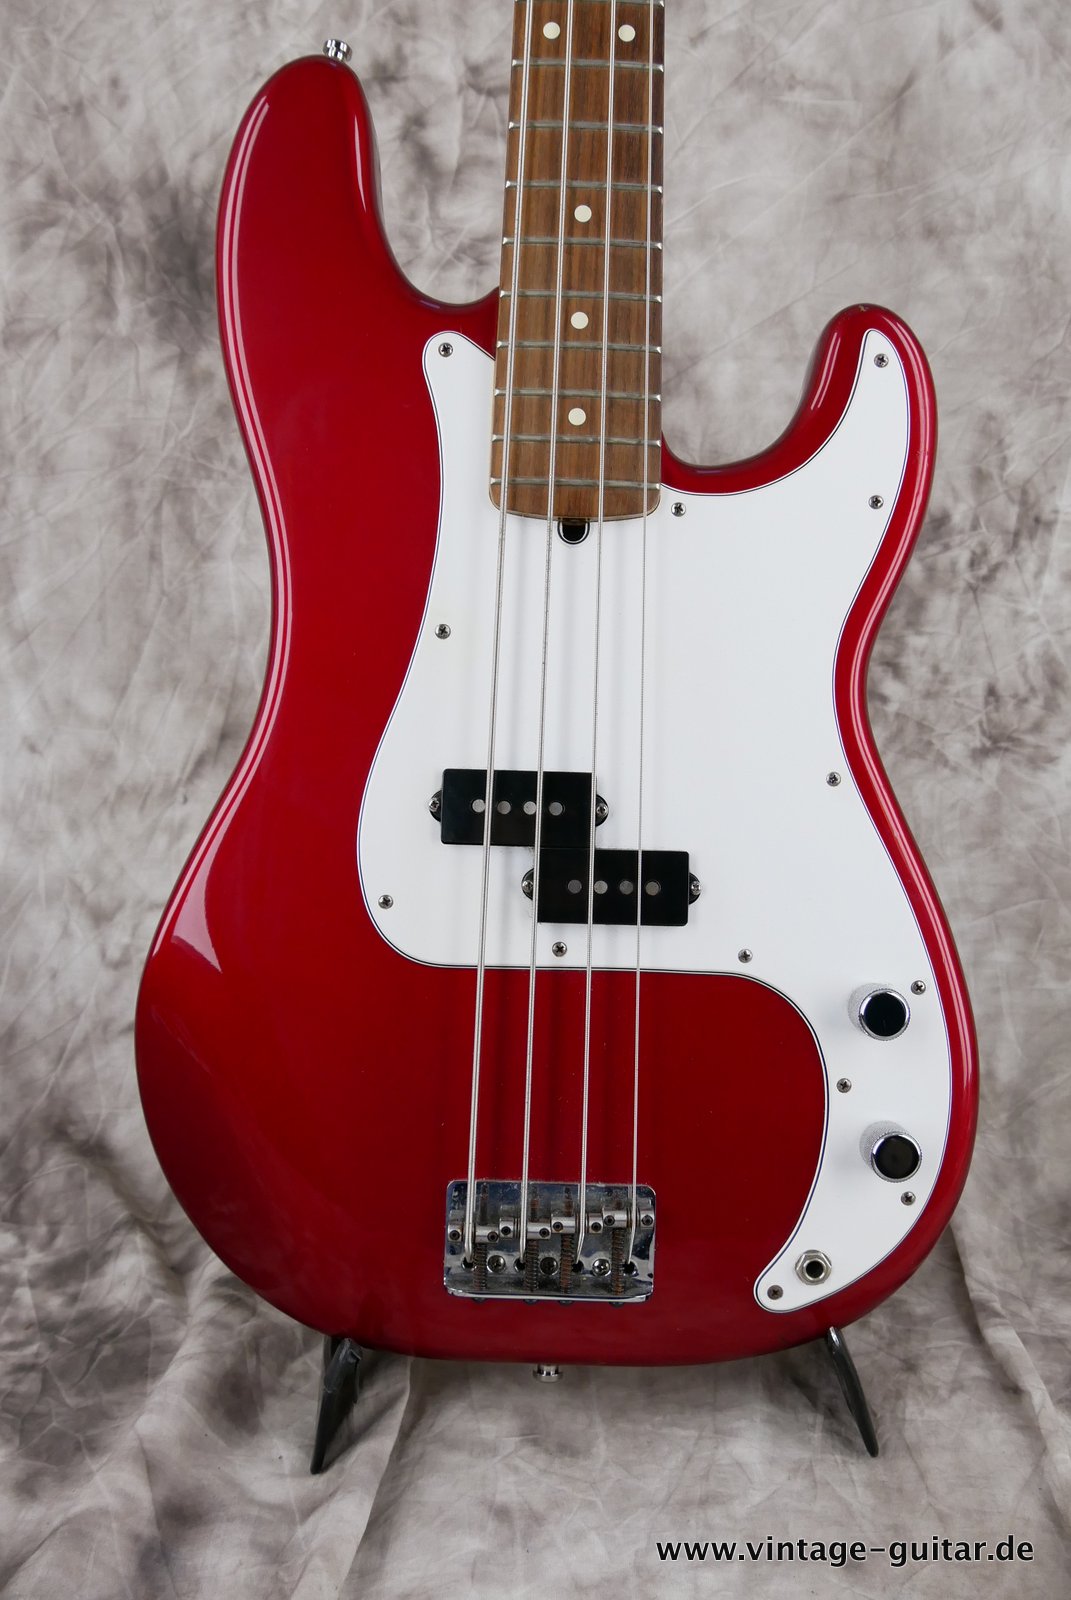 Fender-Precision-Bass-1994-candy-apple-red-002.JPG